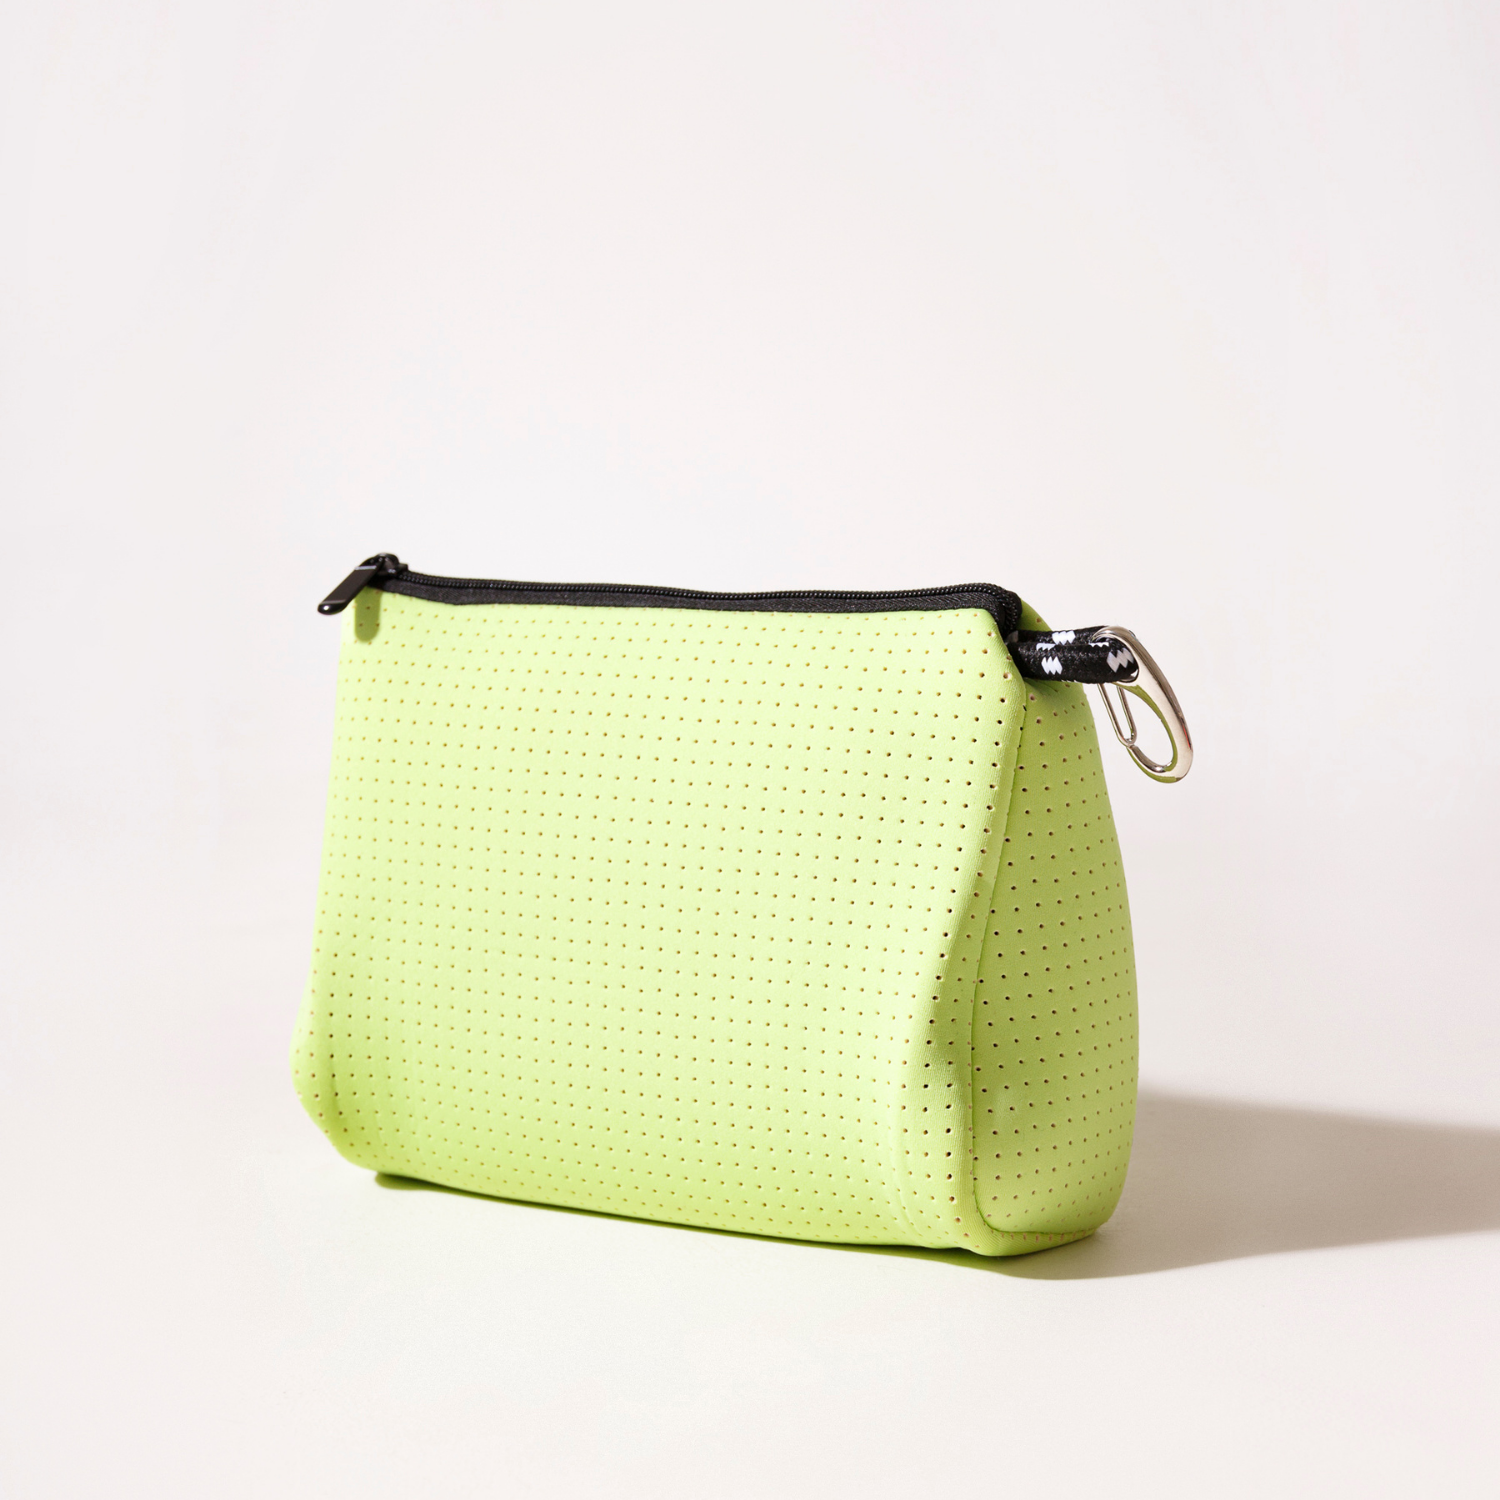 Lime Green Felted Clutch Bag 1 | Large lime green clutch pur… | Flickr